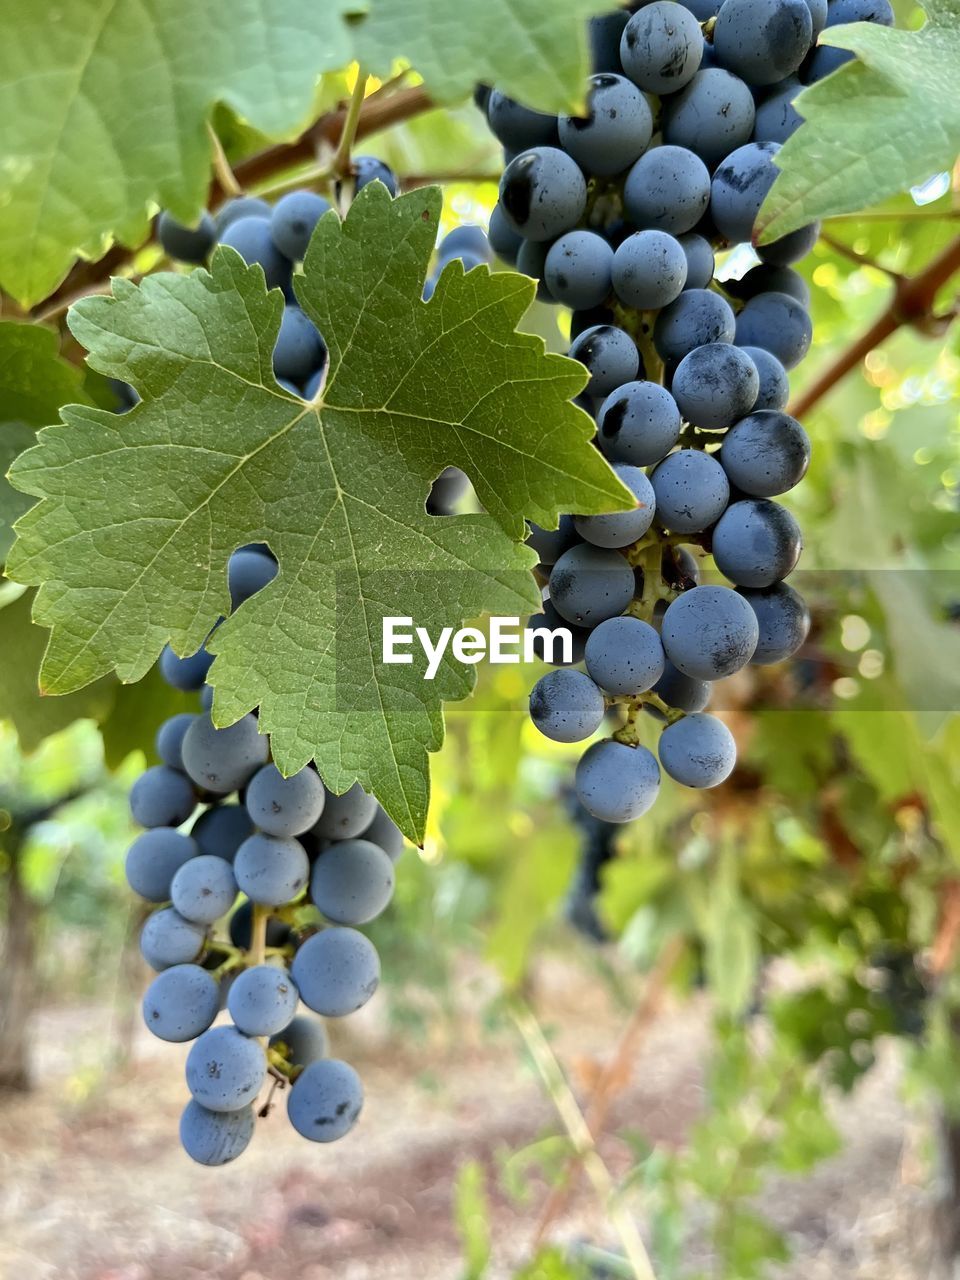 grape, vineyard, food and drink, food, fruit, vine, agriculture, growth, plant, healthy eating, bunch, winemaking, leaf, plant part, freshness, crop, nature, produce, red grape, rural scene, landscape, field, wellbeing, farm, grape leaves, no people, wine, close-up, tree, green, land, ripe, juicy, winery, beauty in nature, cultivated, outdoors, day, refreshment, alcohol, abundance, drink, grapefruit, hanging